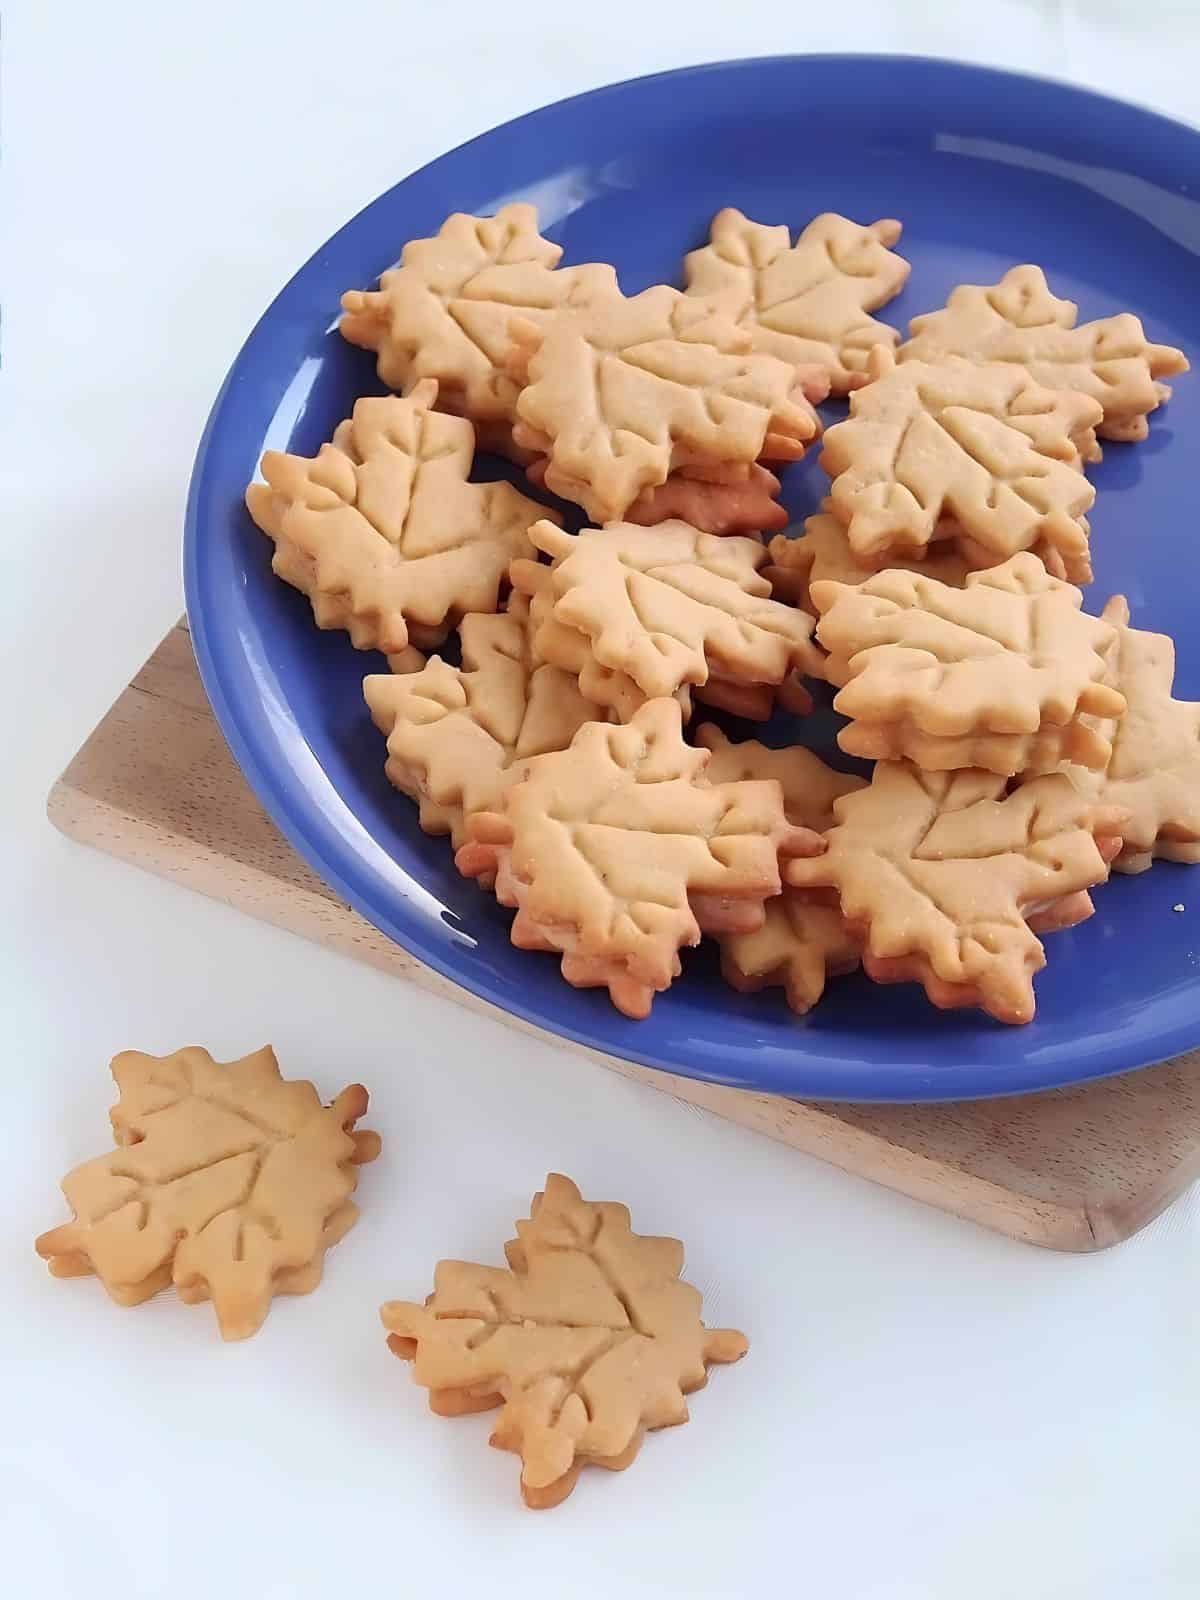 Maple leaf designed cookies on a blue plate.